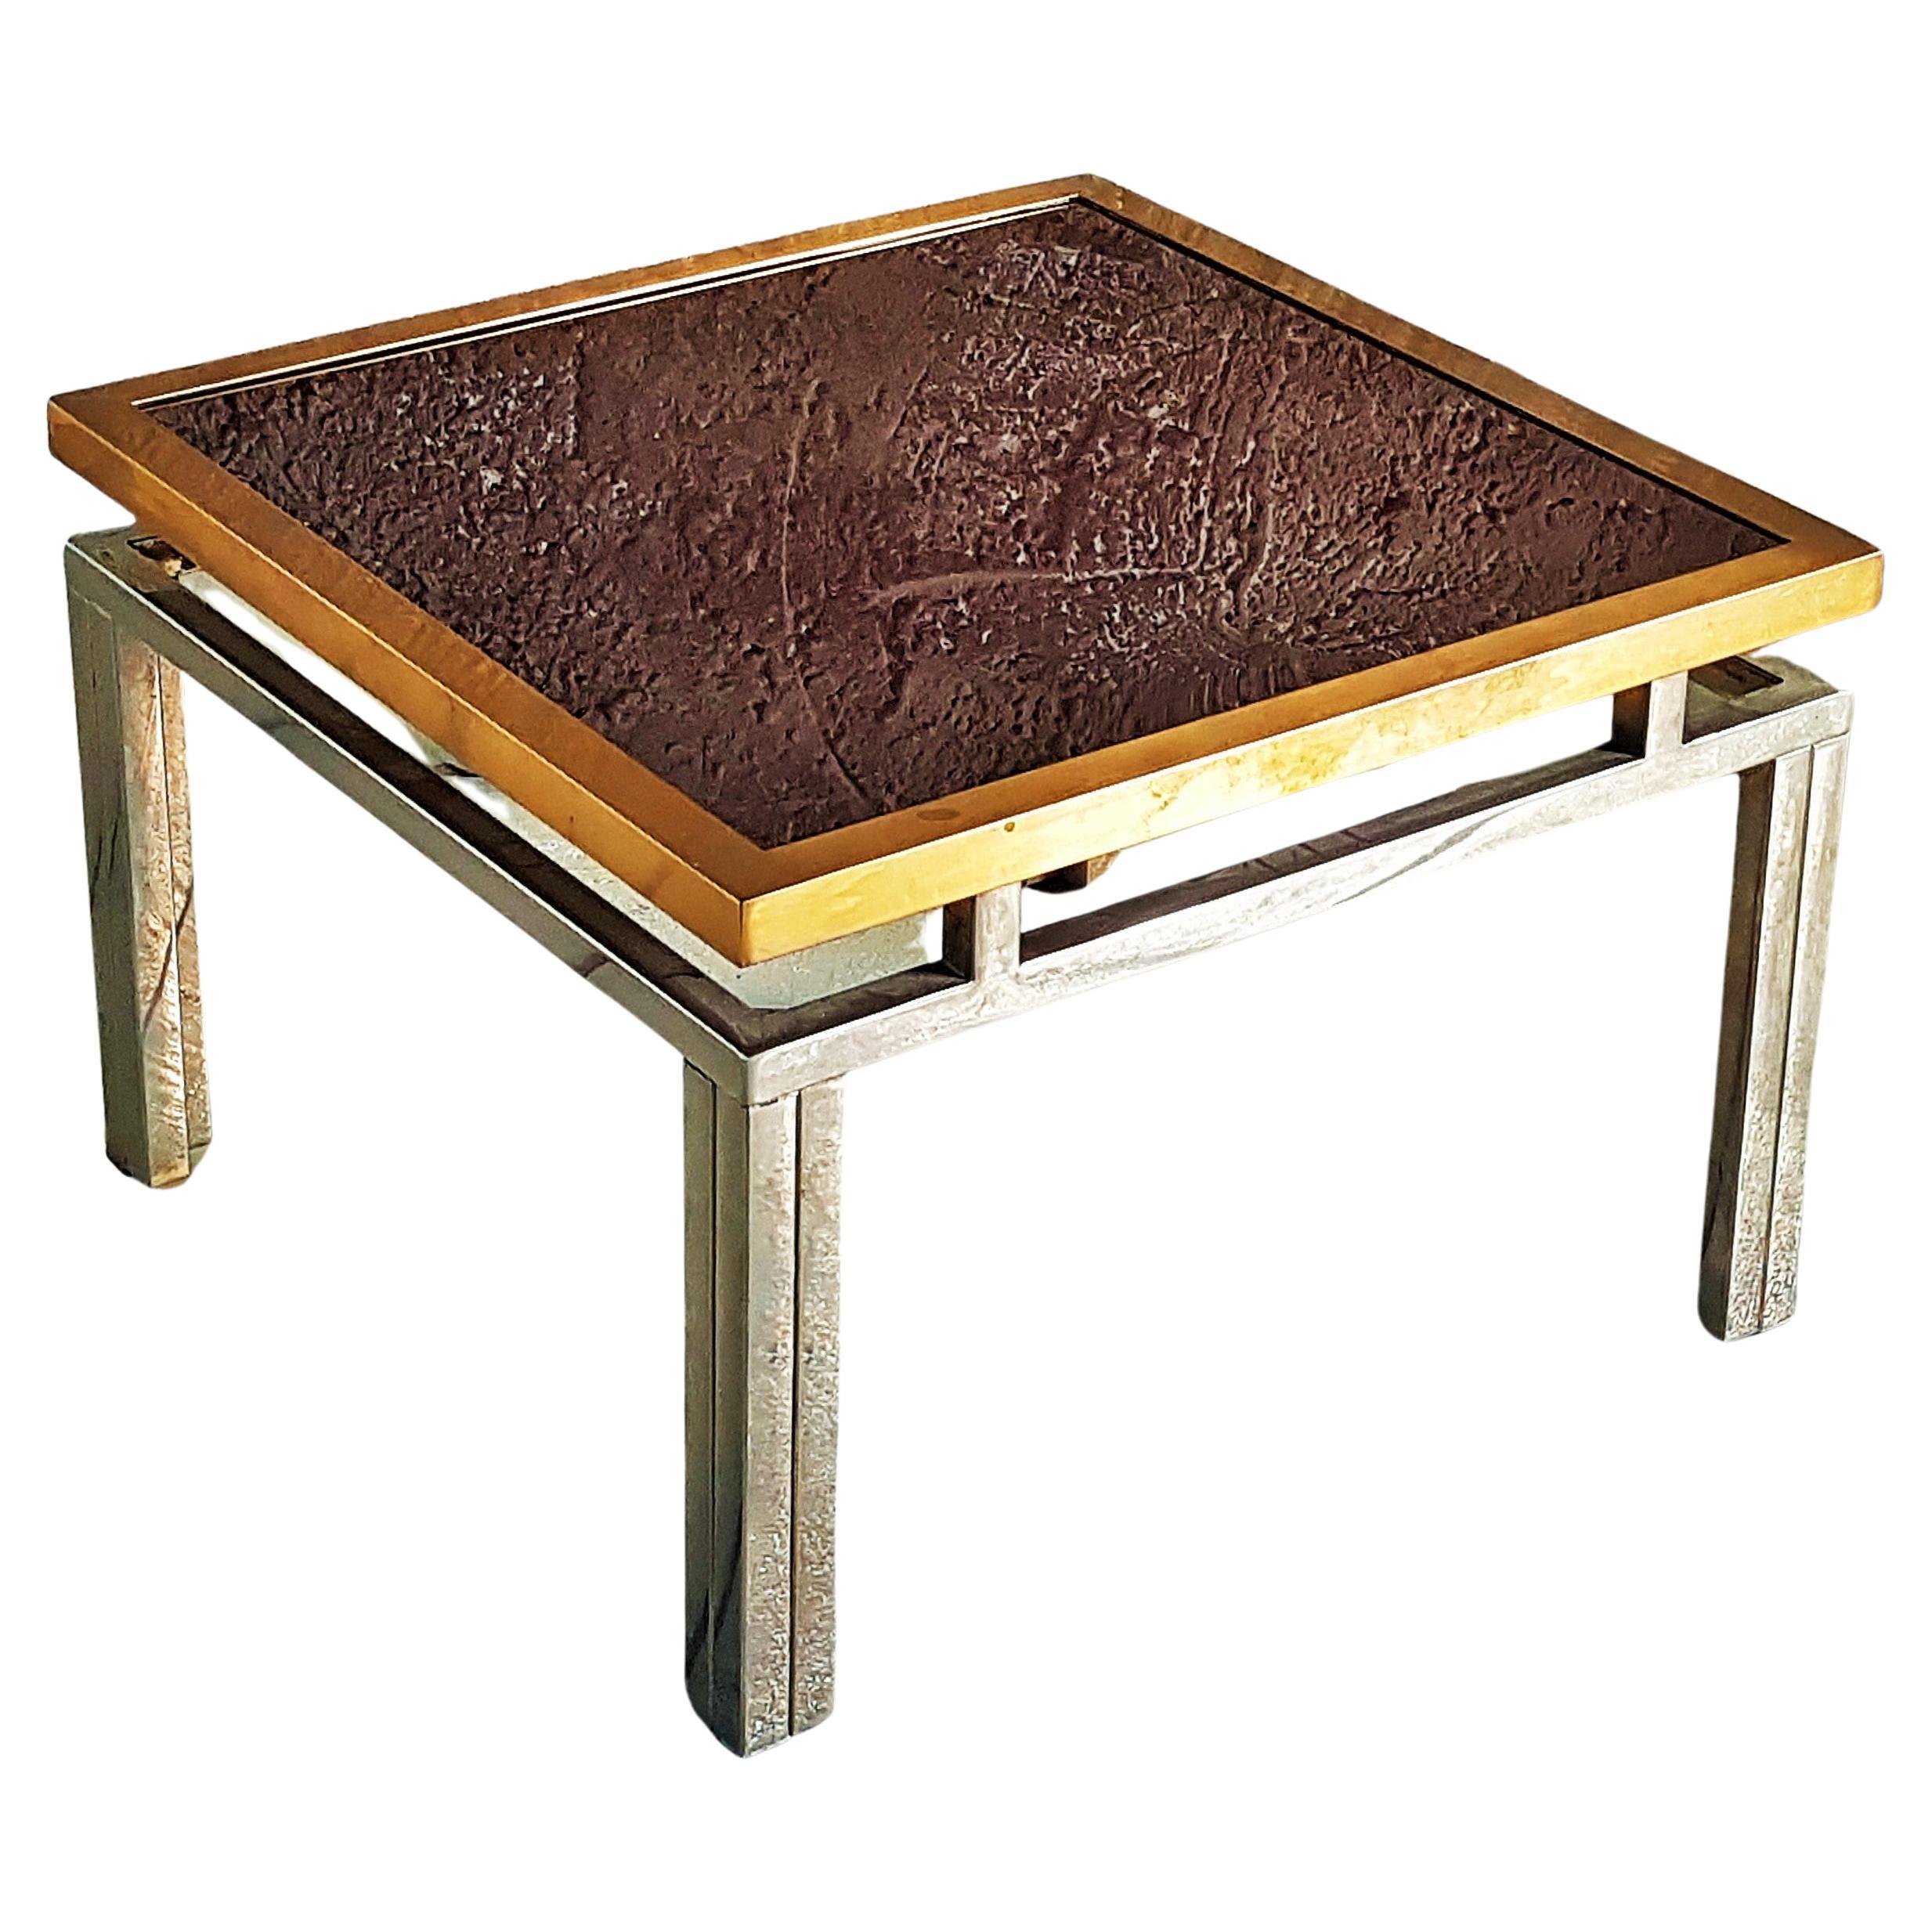 MidCentury Nickel and Brass Side Table by Lefevre for Maison Jansen, France 1970